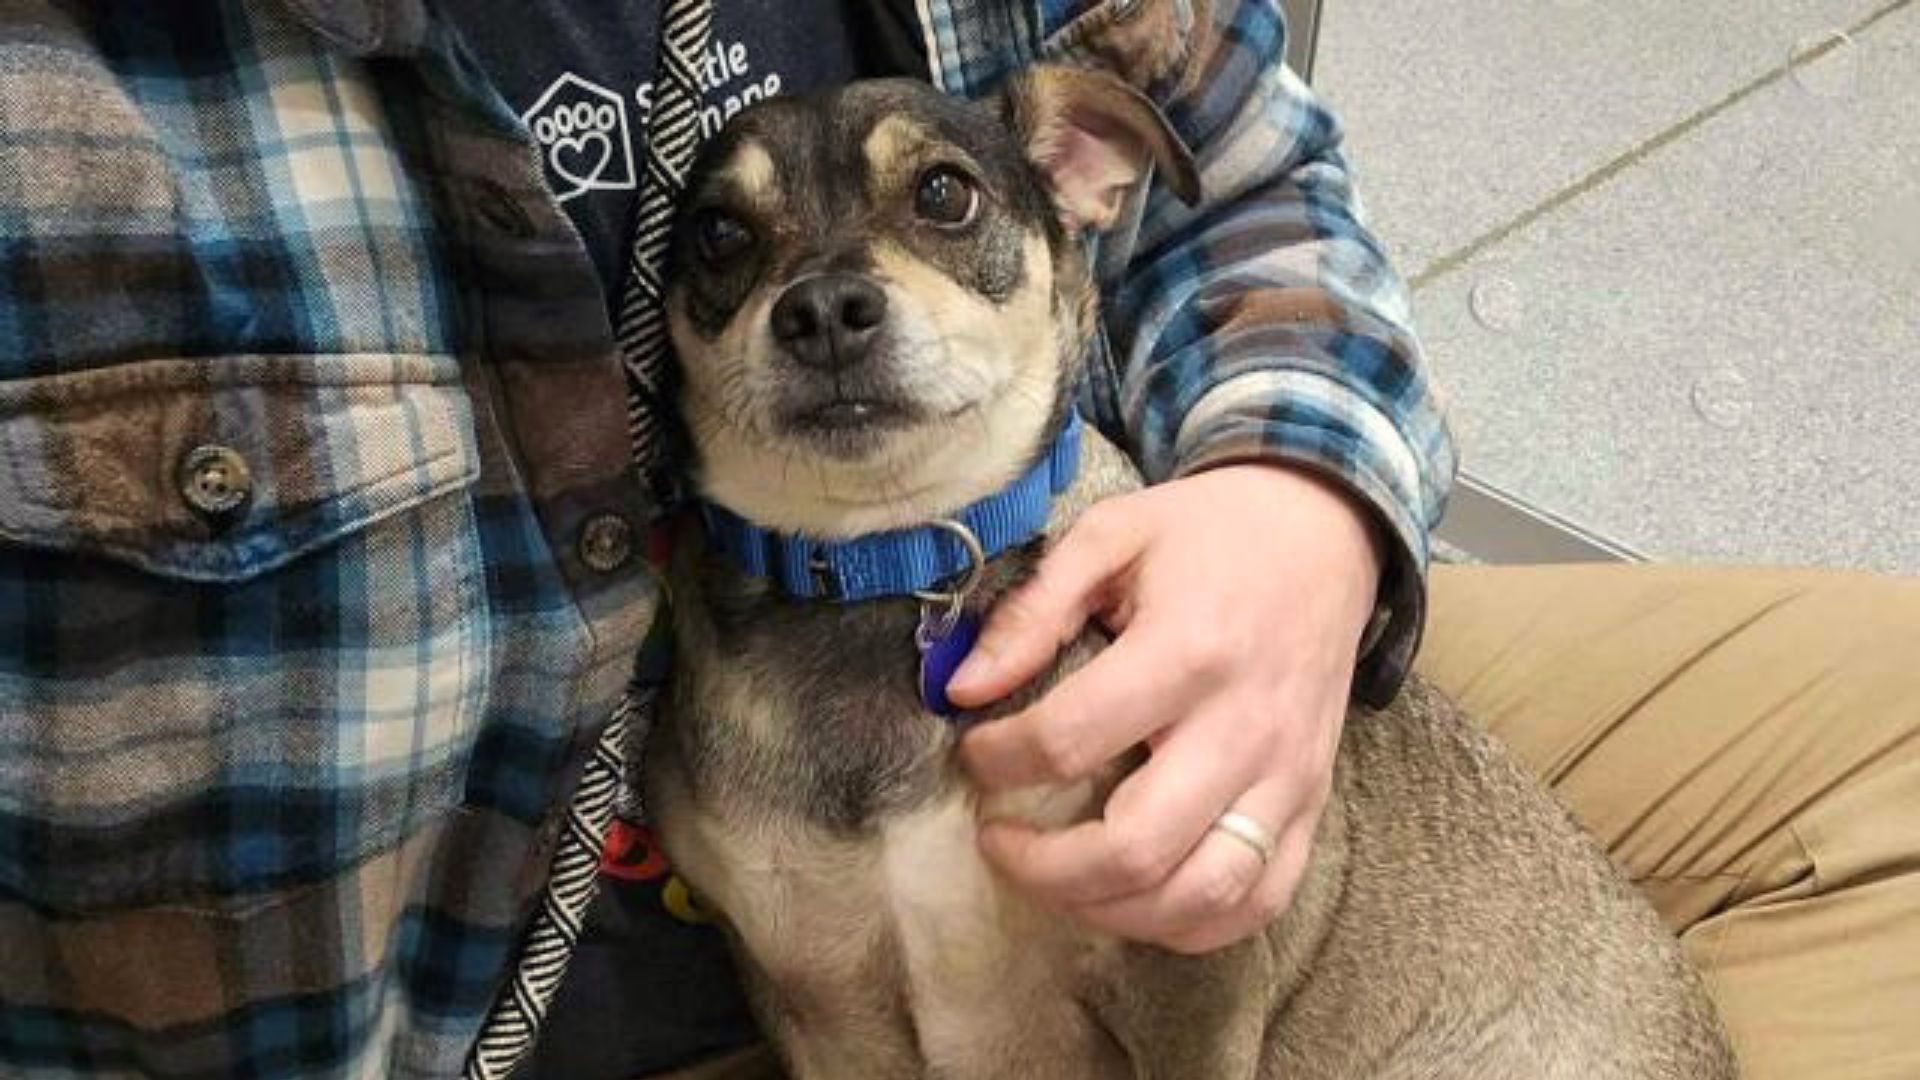 Viral Video Helped This Senior Dog To Start A New Life After Being Surrendered From His Home